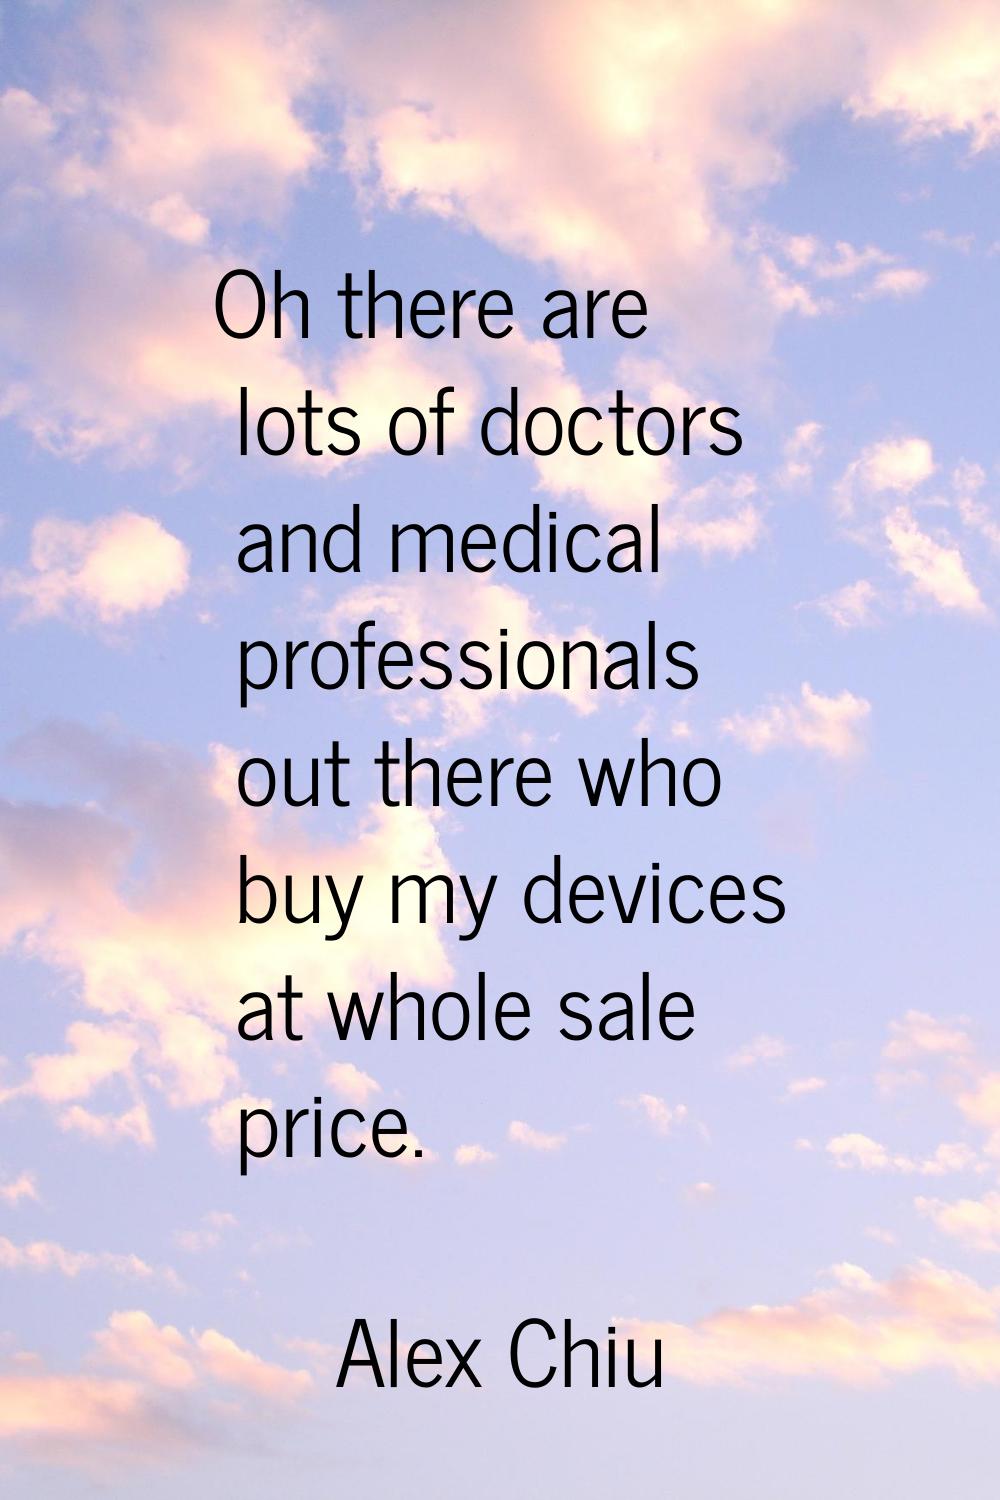 Oh there are lots of doctors and medical professionals out there who buy my devices at whole sale p